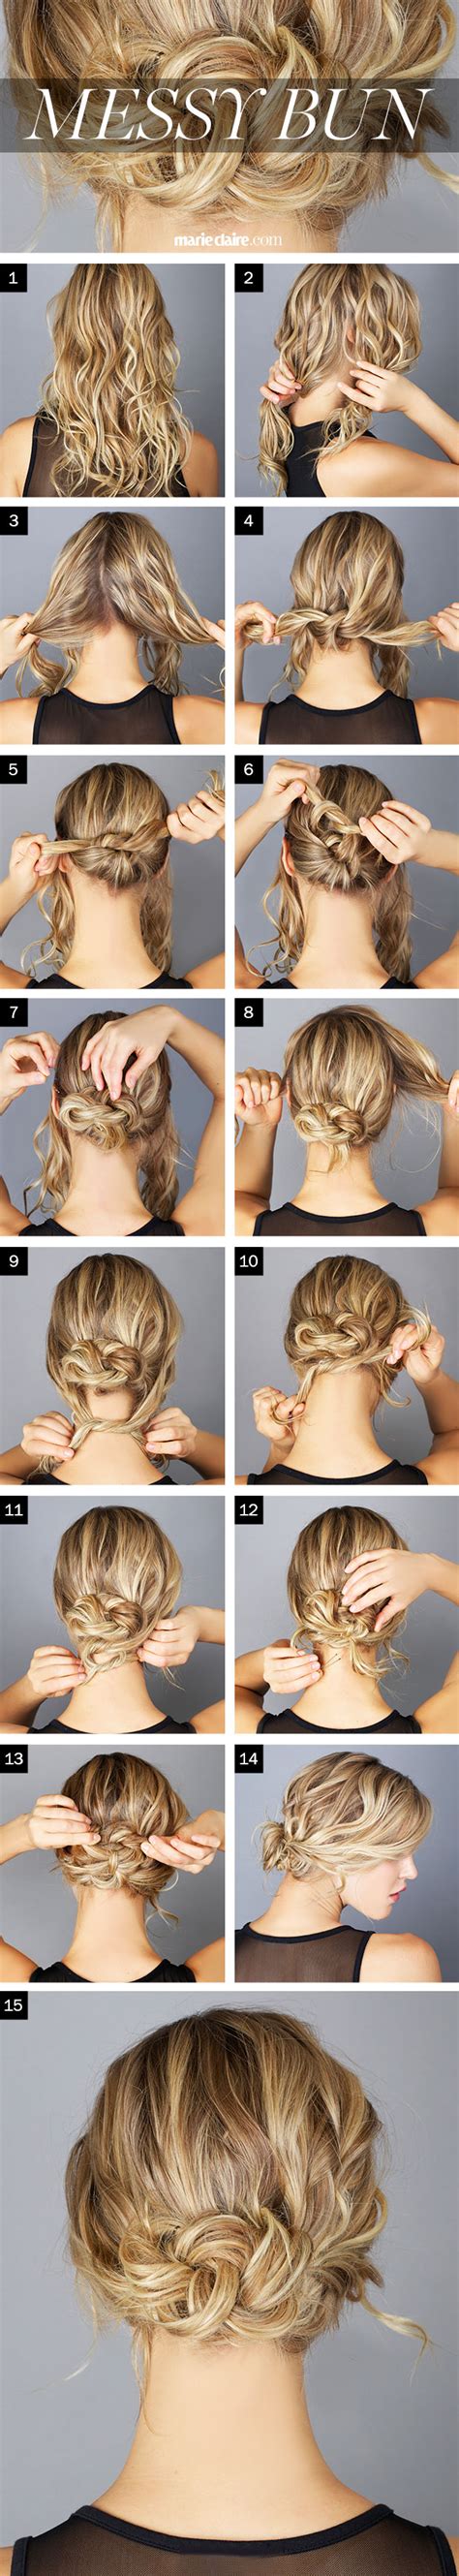 best messy bun hairstyles and tips how to do a messy bun